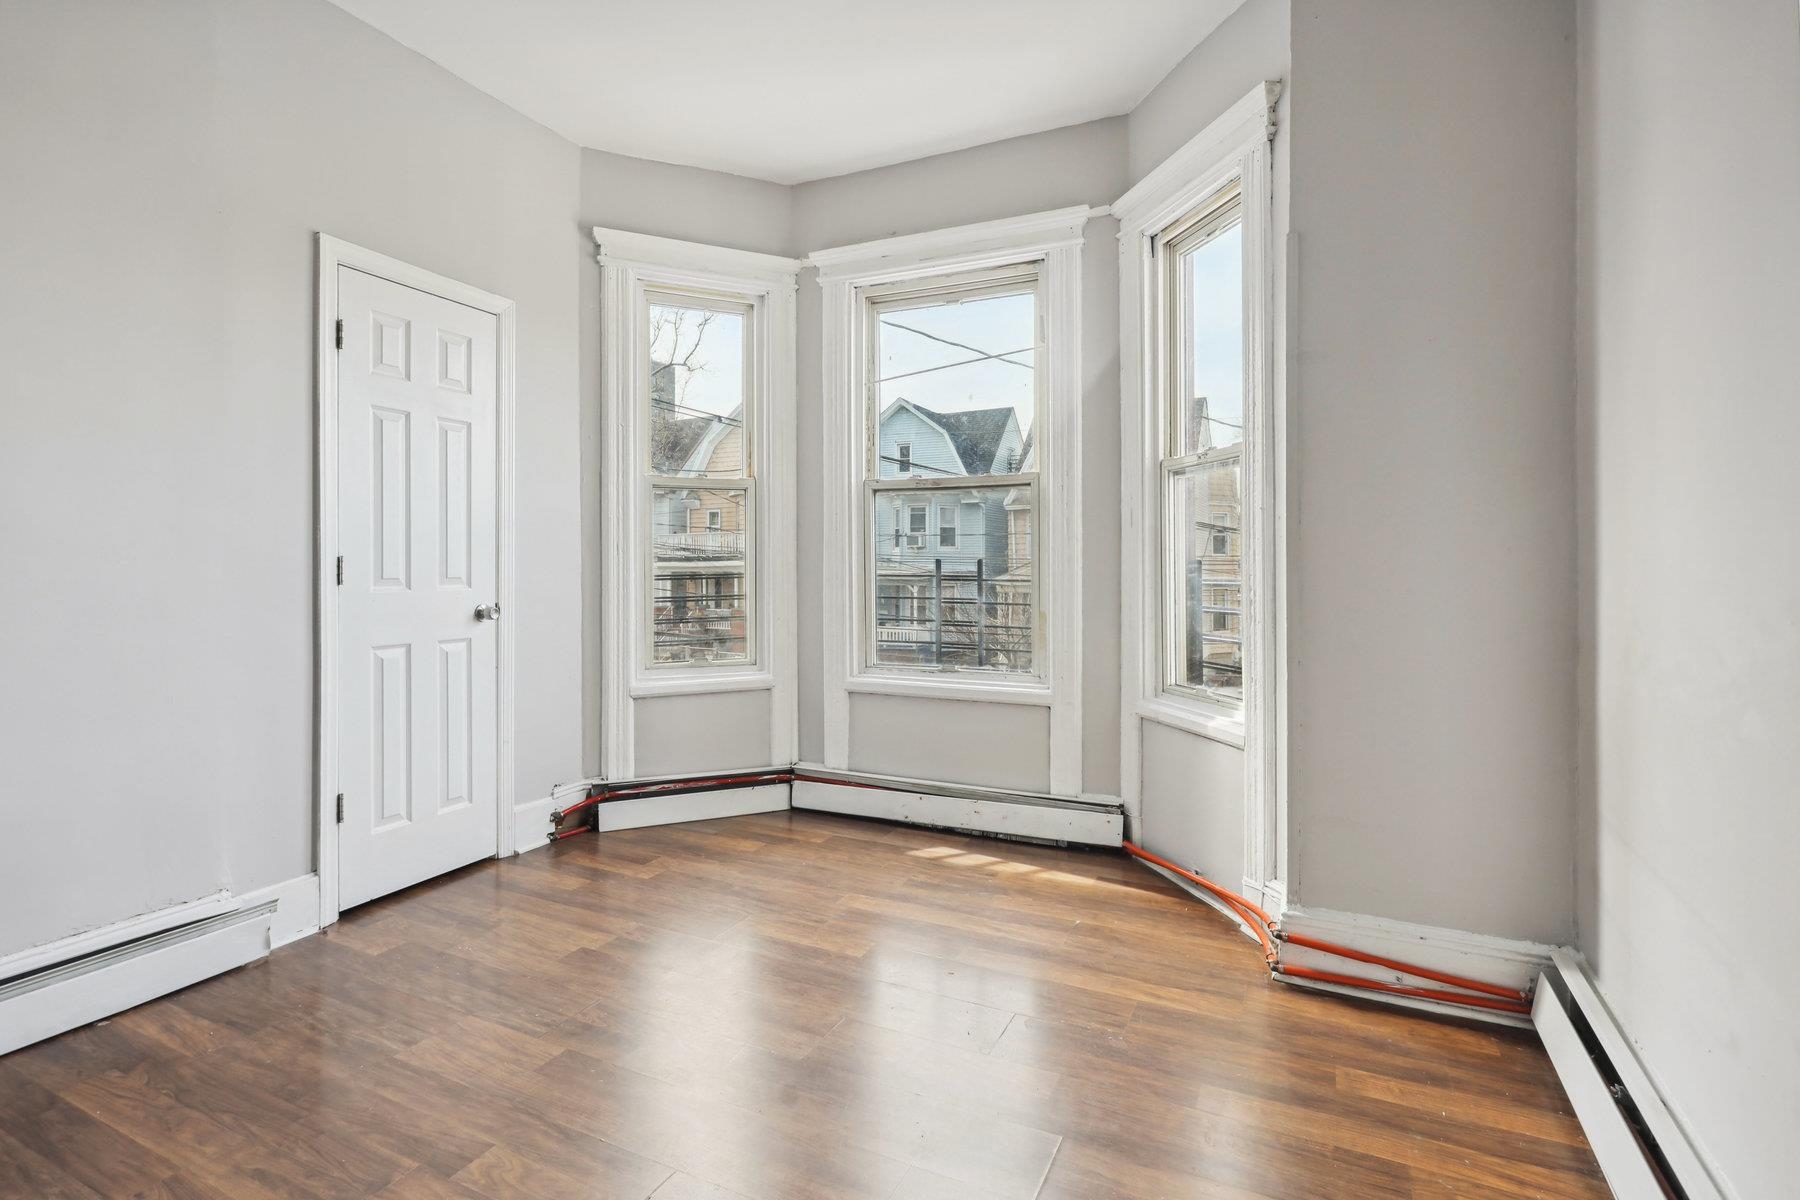 # 240004854 - For Rent in JERSEY CITY - Journal Square NJ